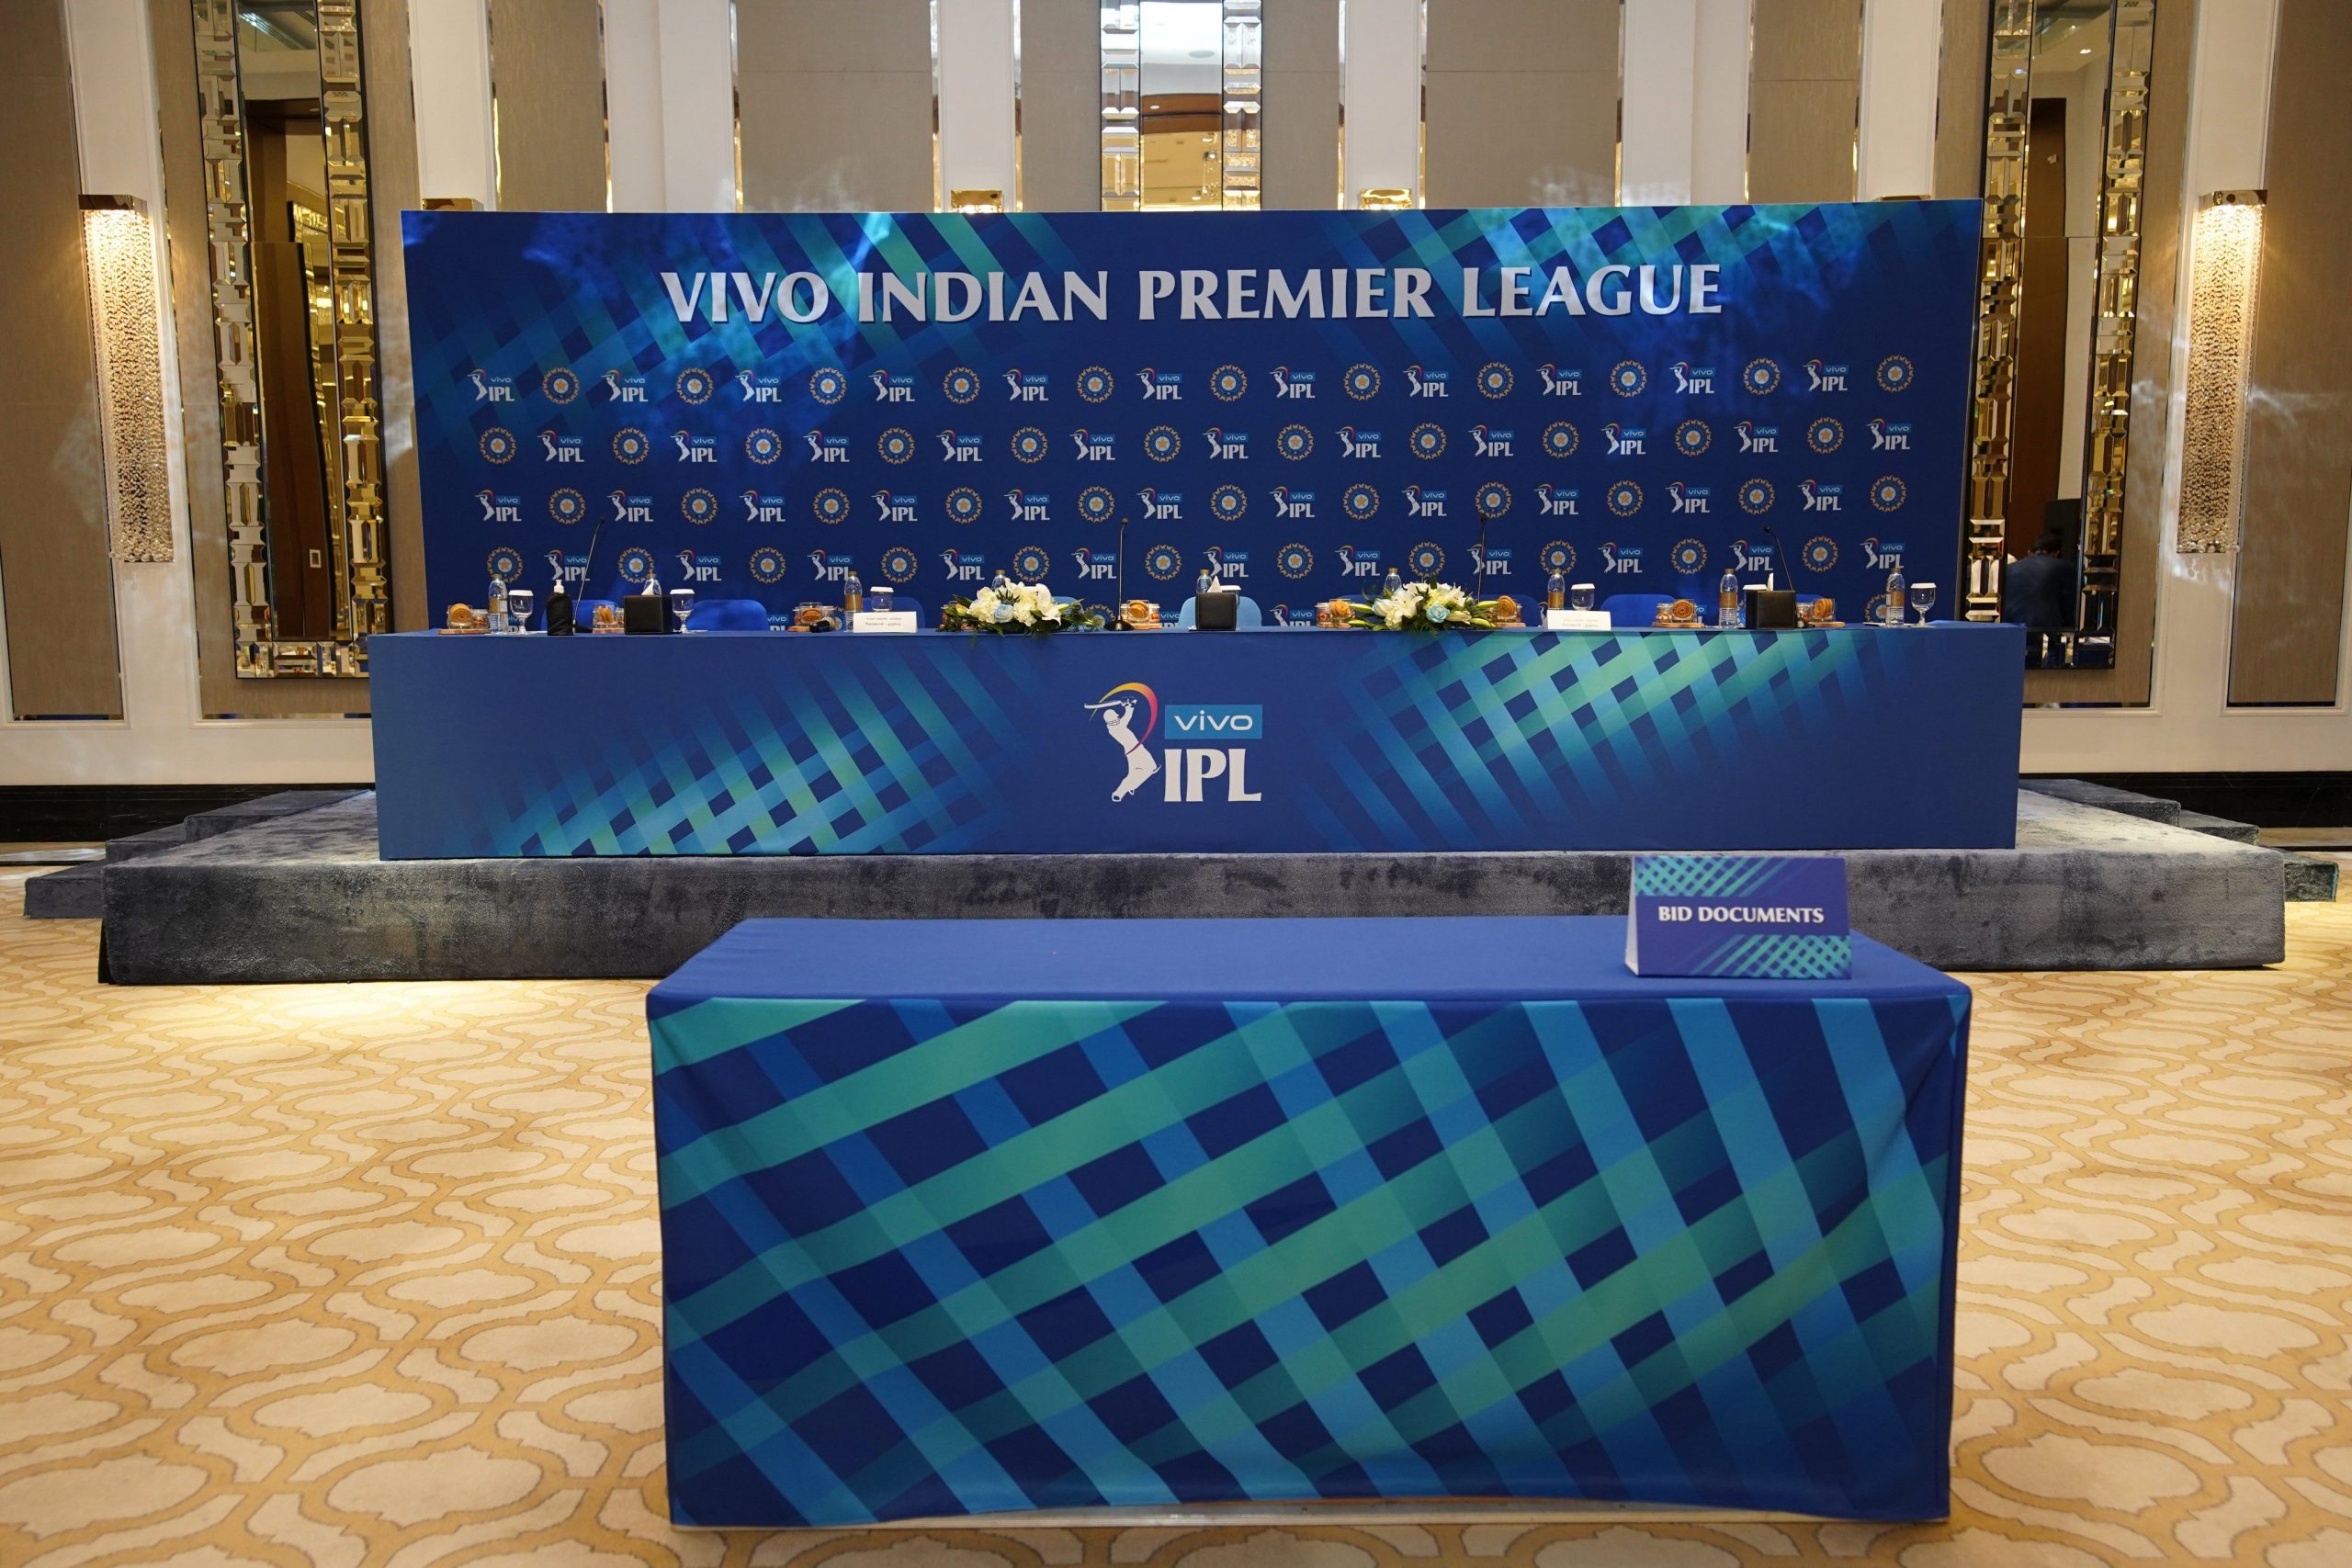 Explained: Two new IPL teams and their impact on the tournament